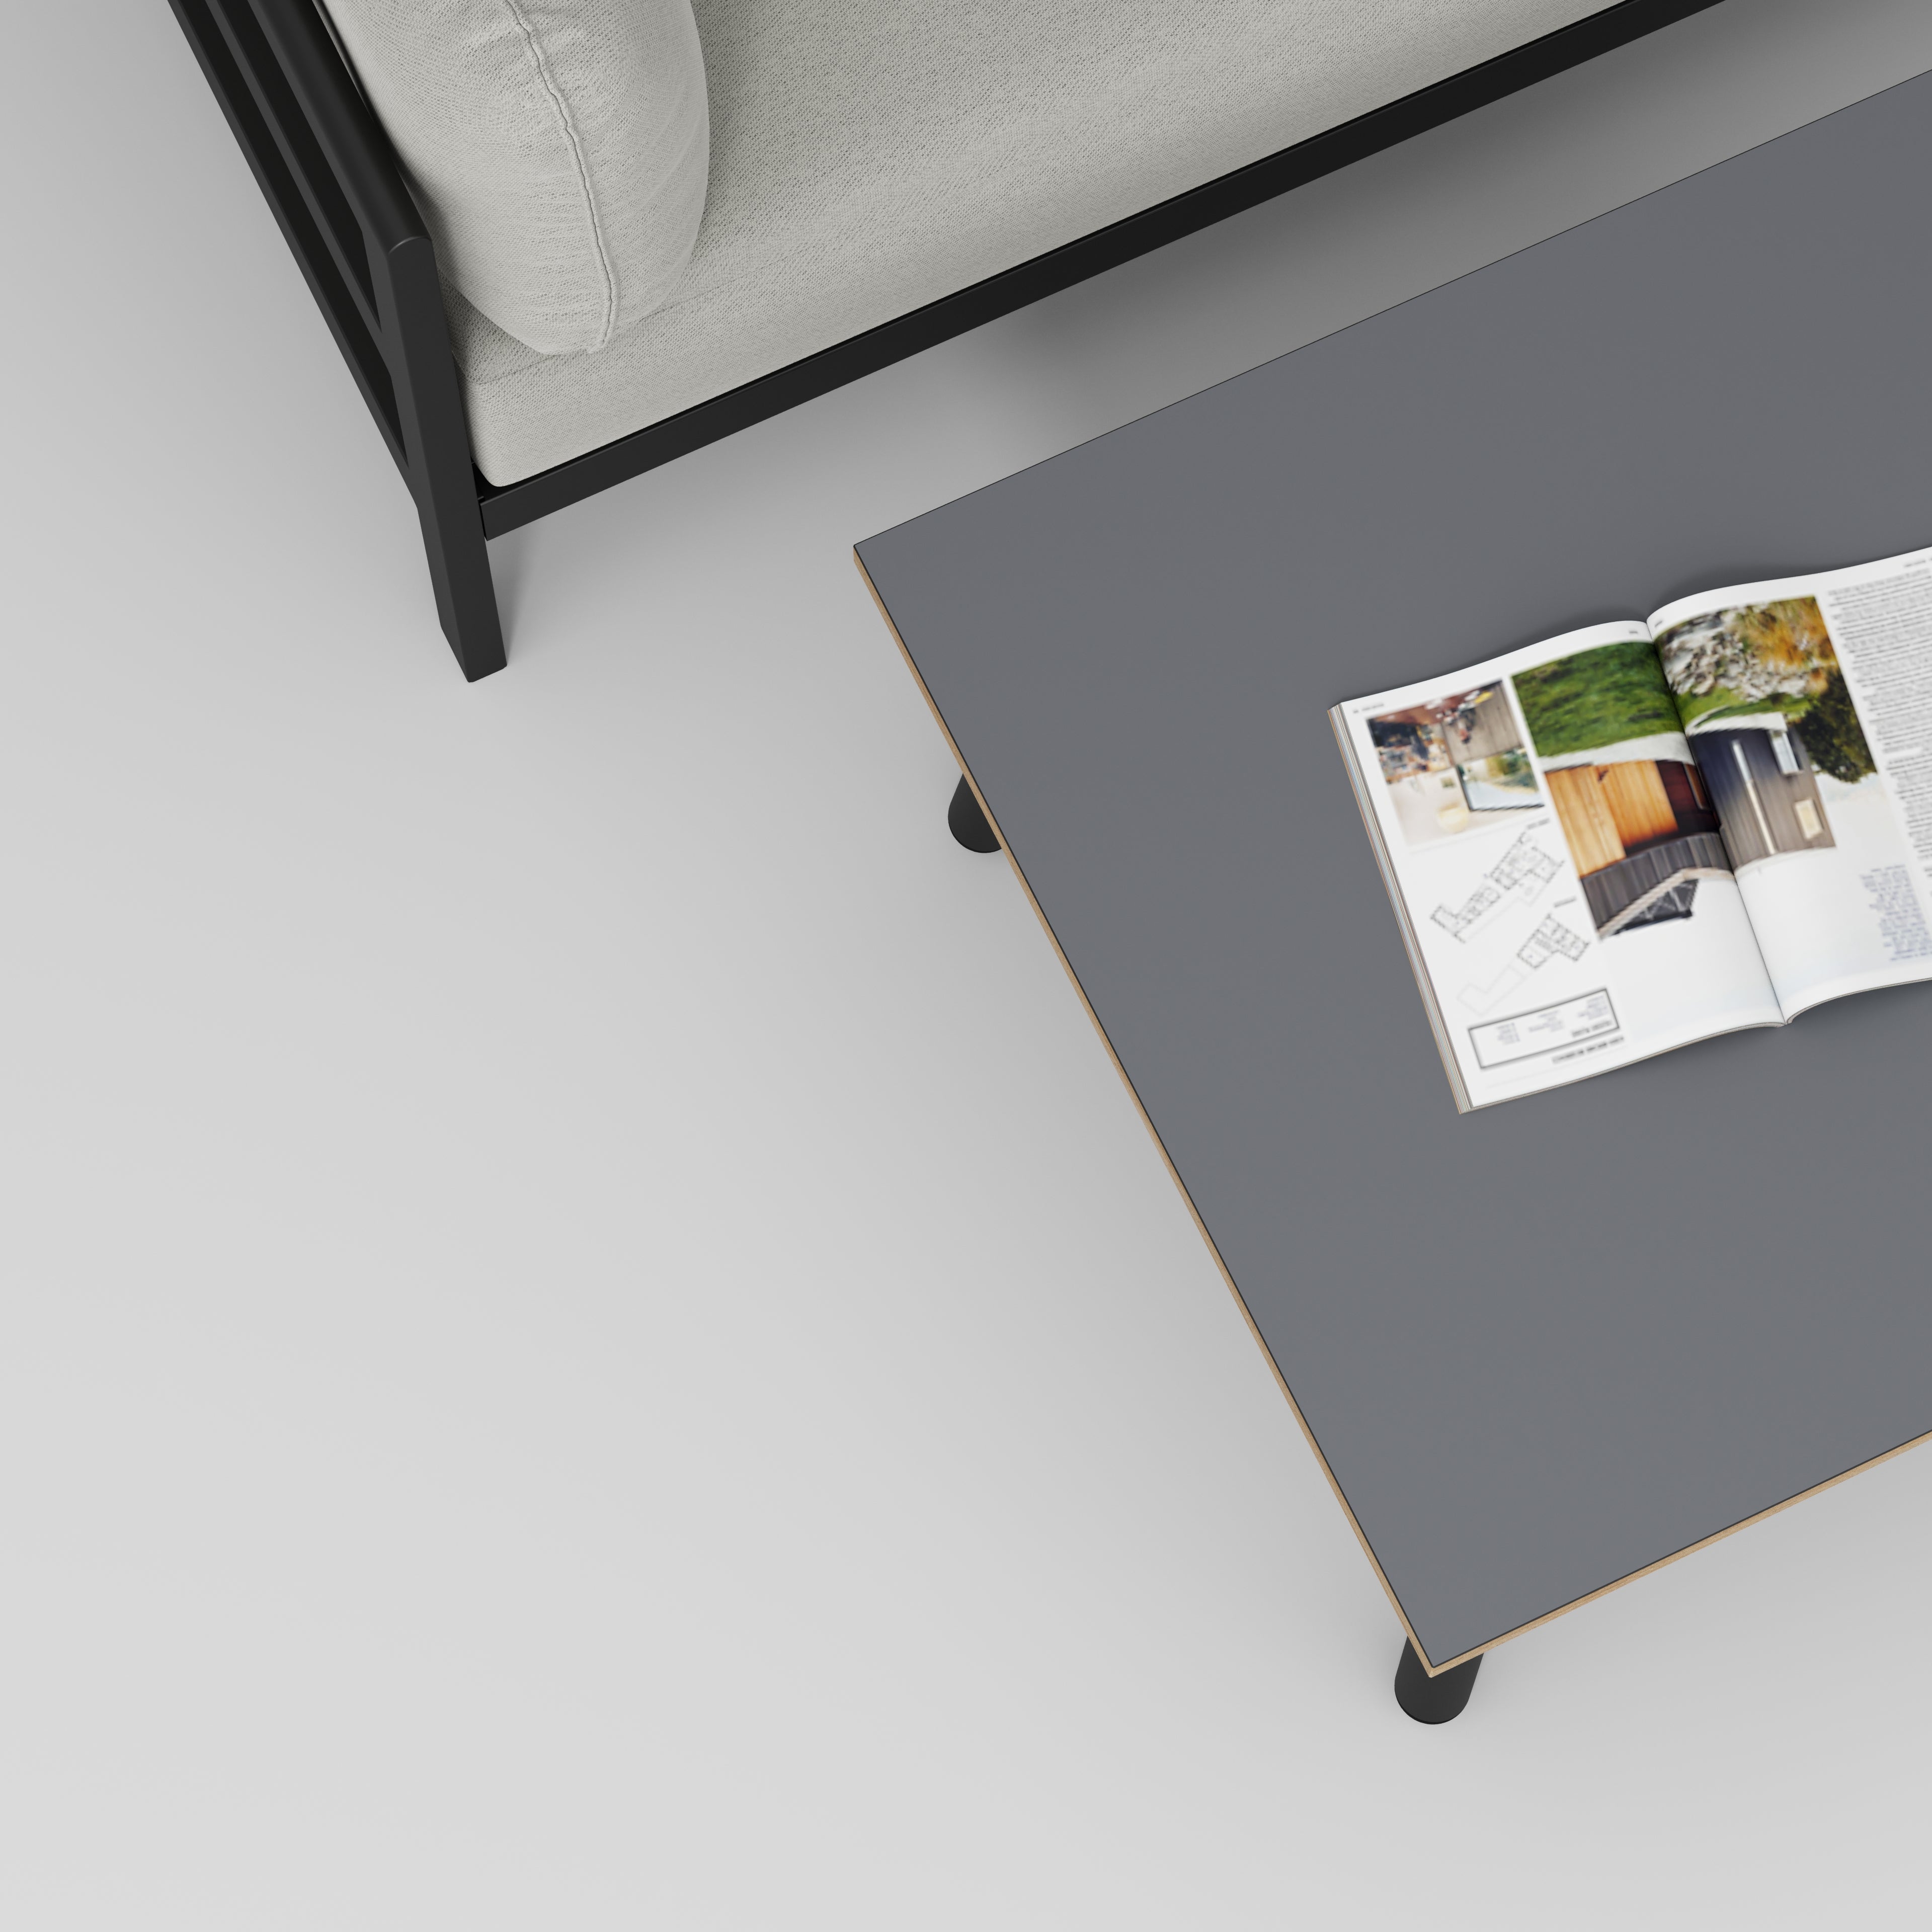 Coffee Table with Black Round Single Pin Legs - Formica Tornado Grey - 800(w) x 800(d) x 425(h)